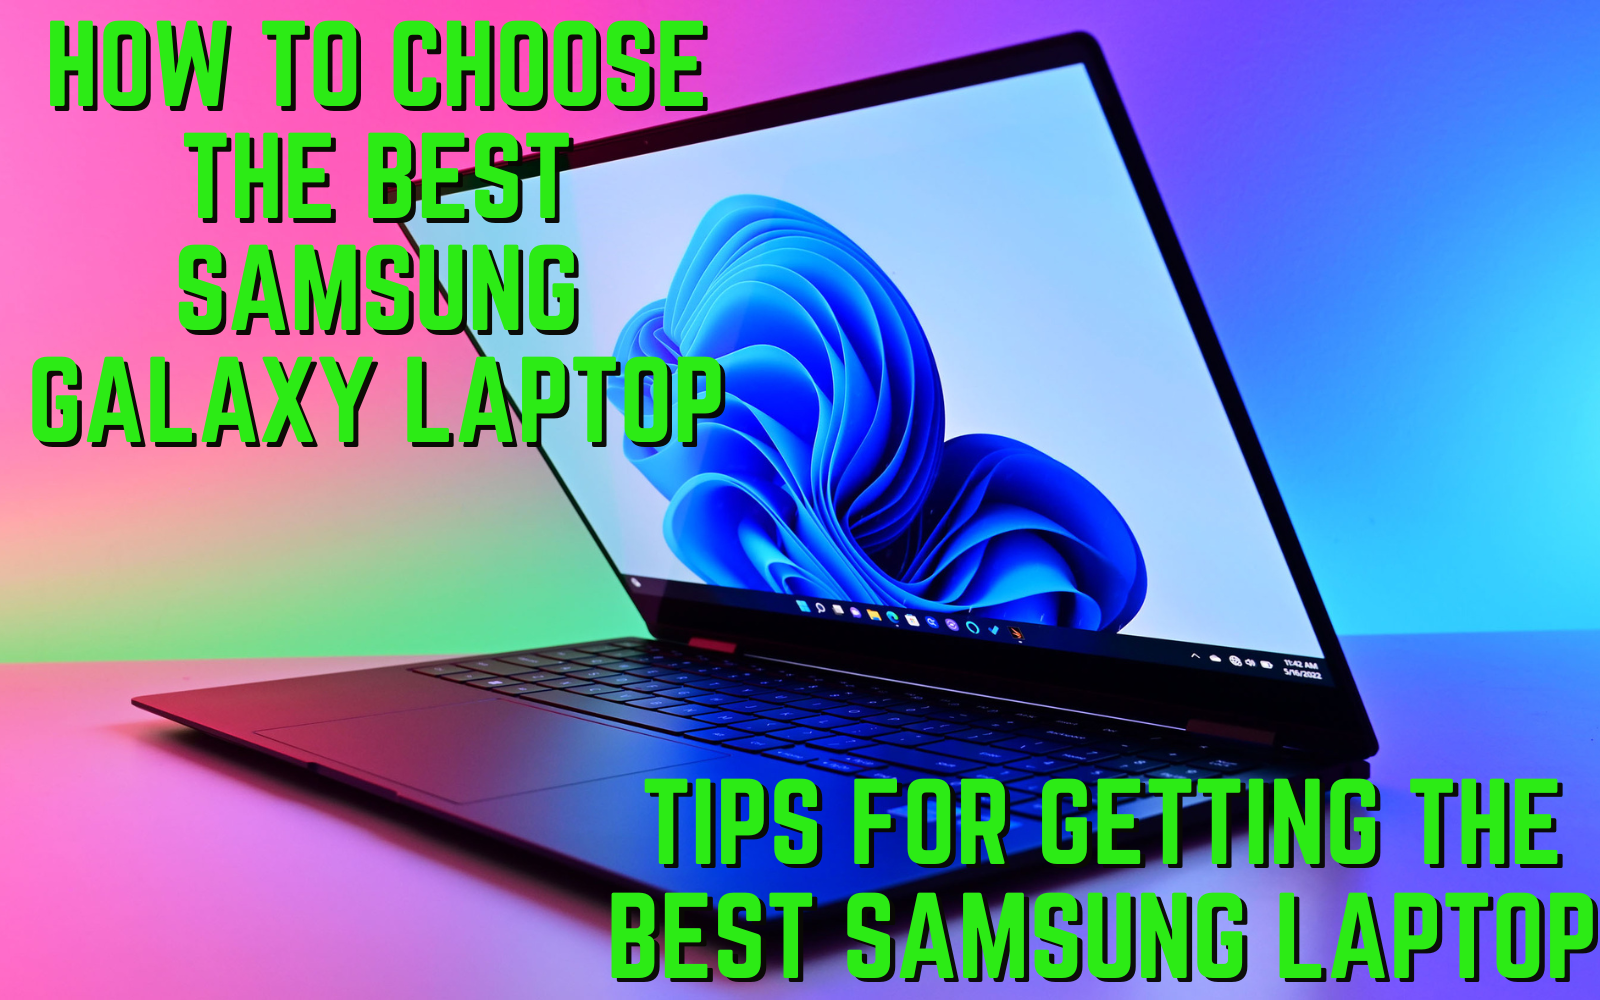 How to Choose the Best Samsung Galaxy Laptop